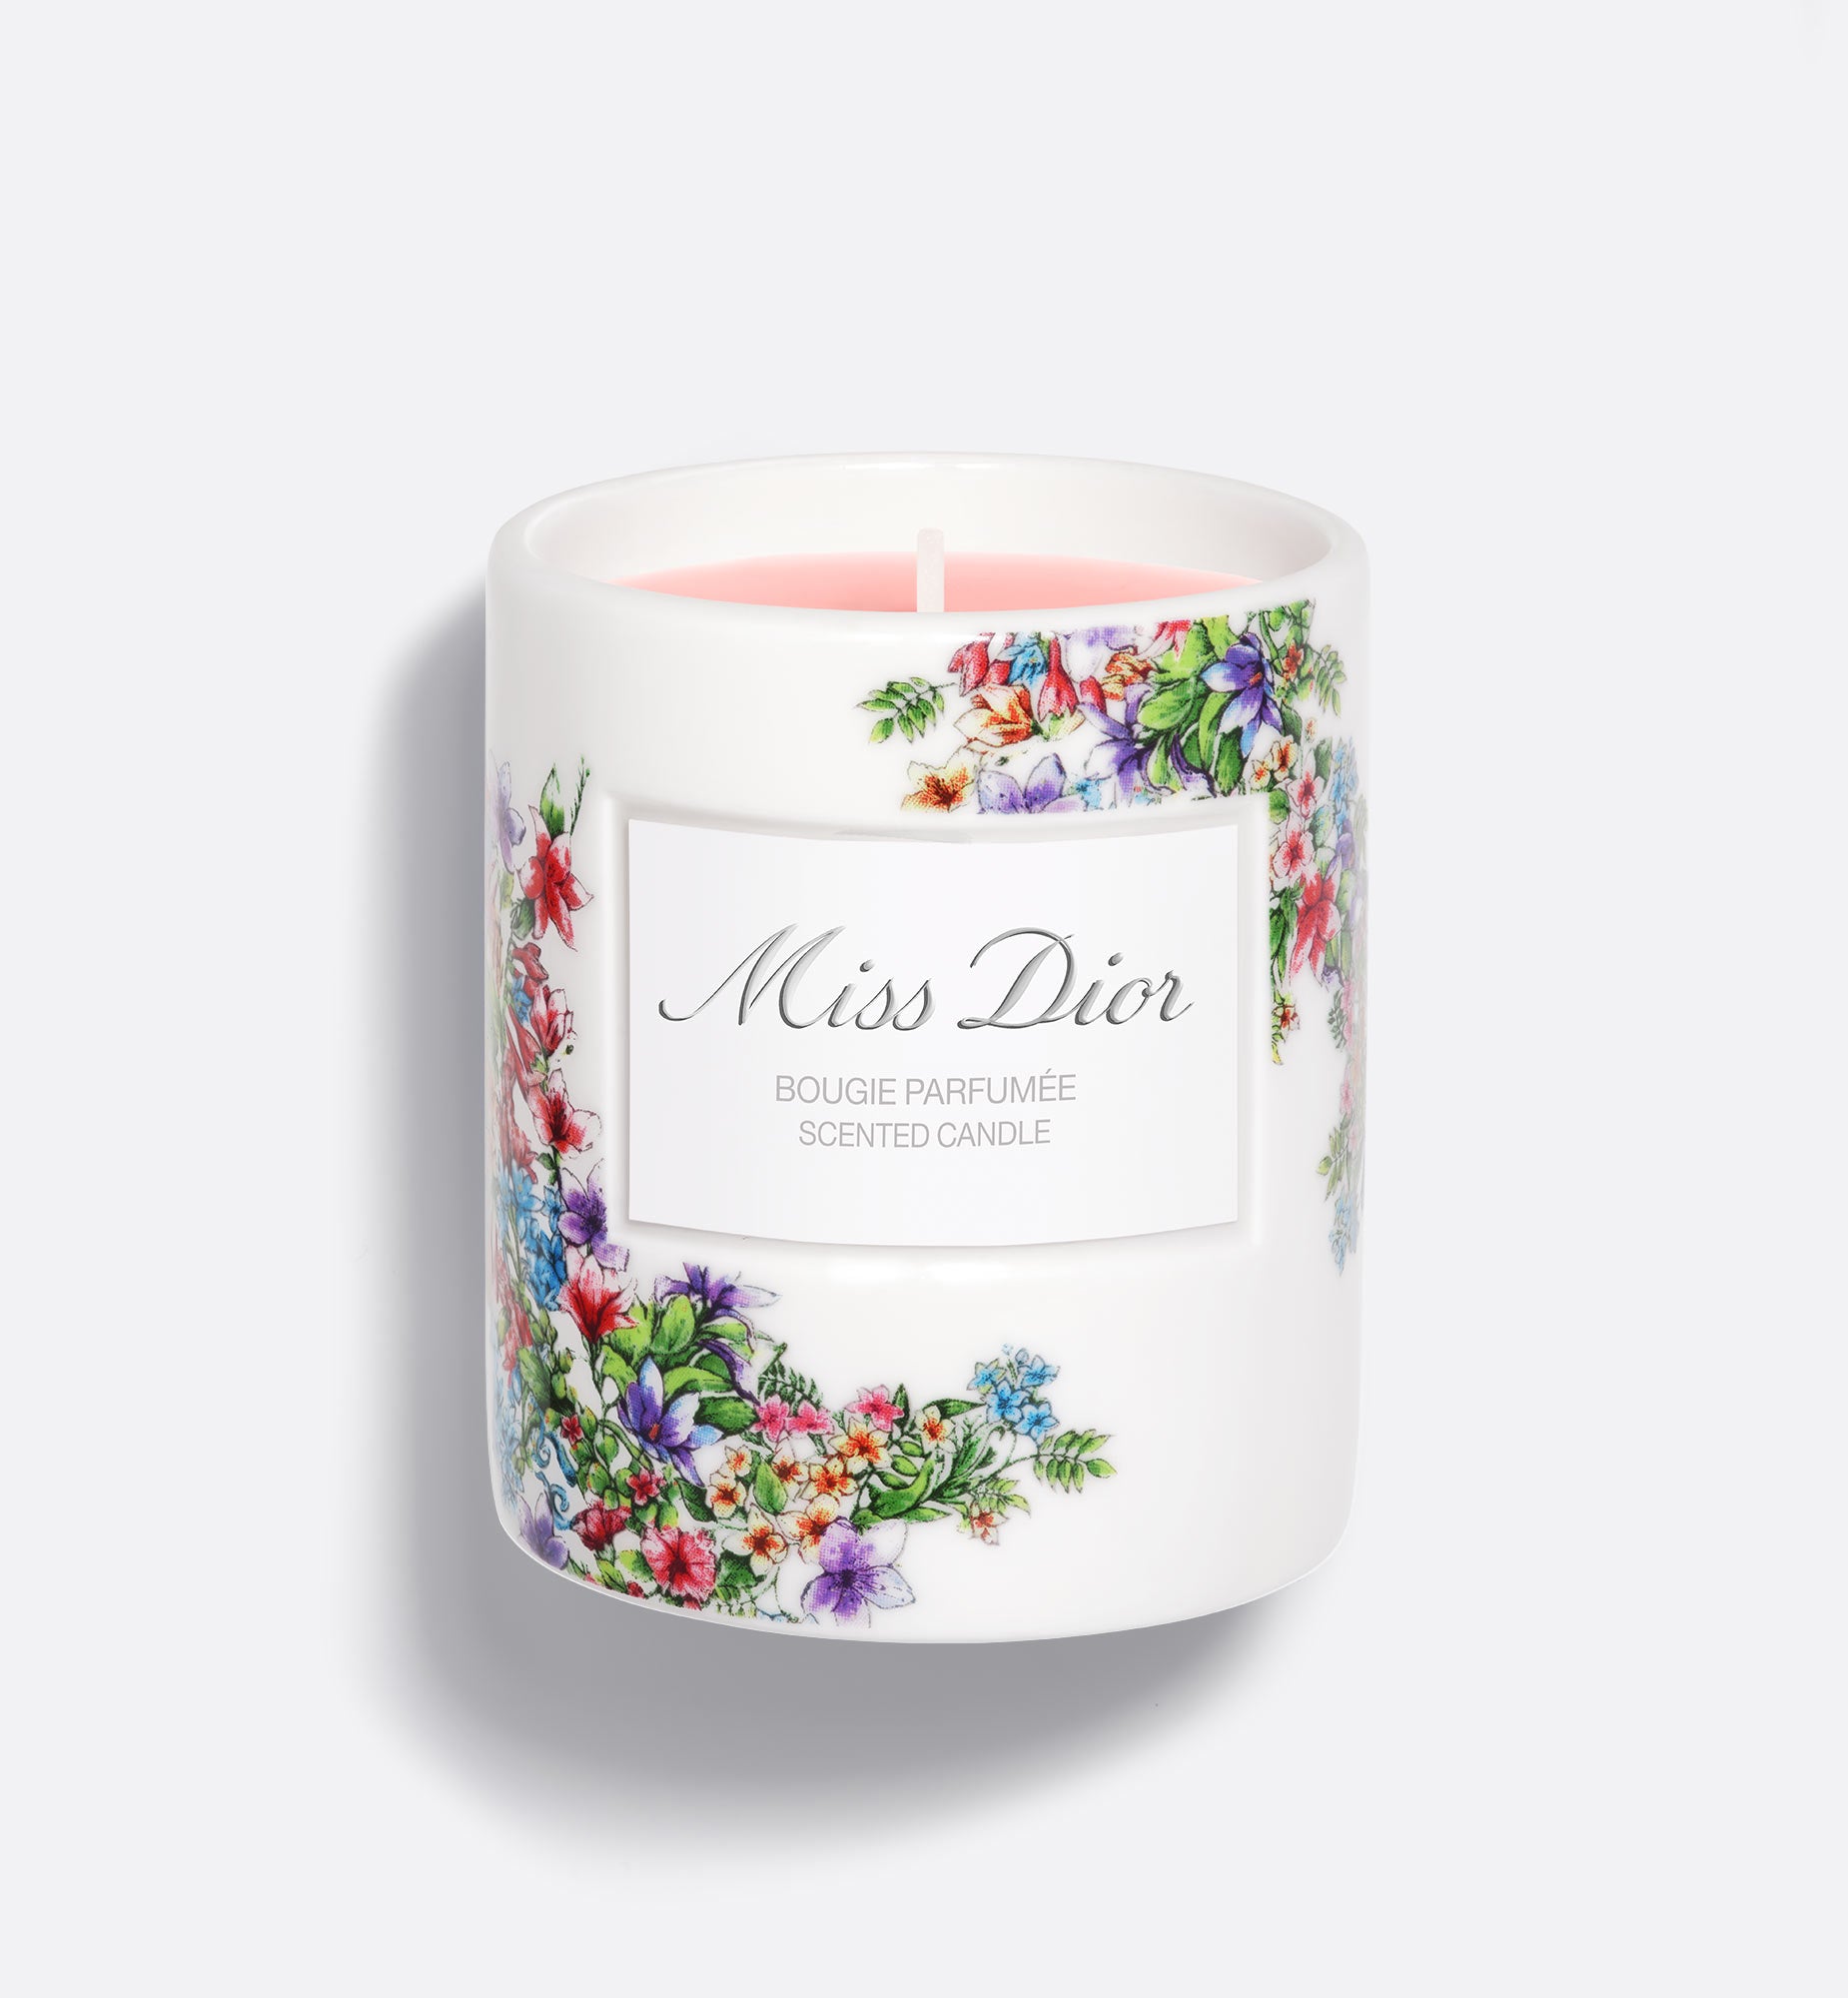 Miss Dior Scented Candle - Limited Edition | Scented Candle - Floral Notes